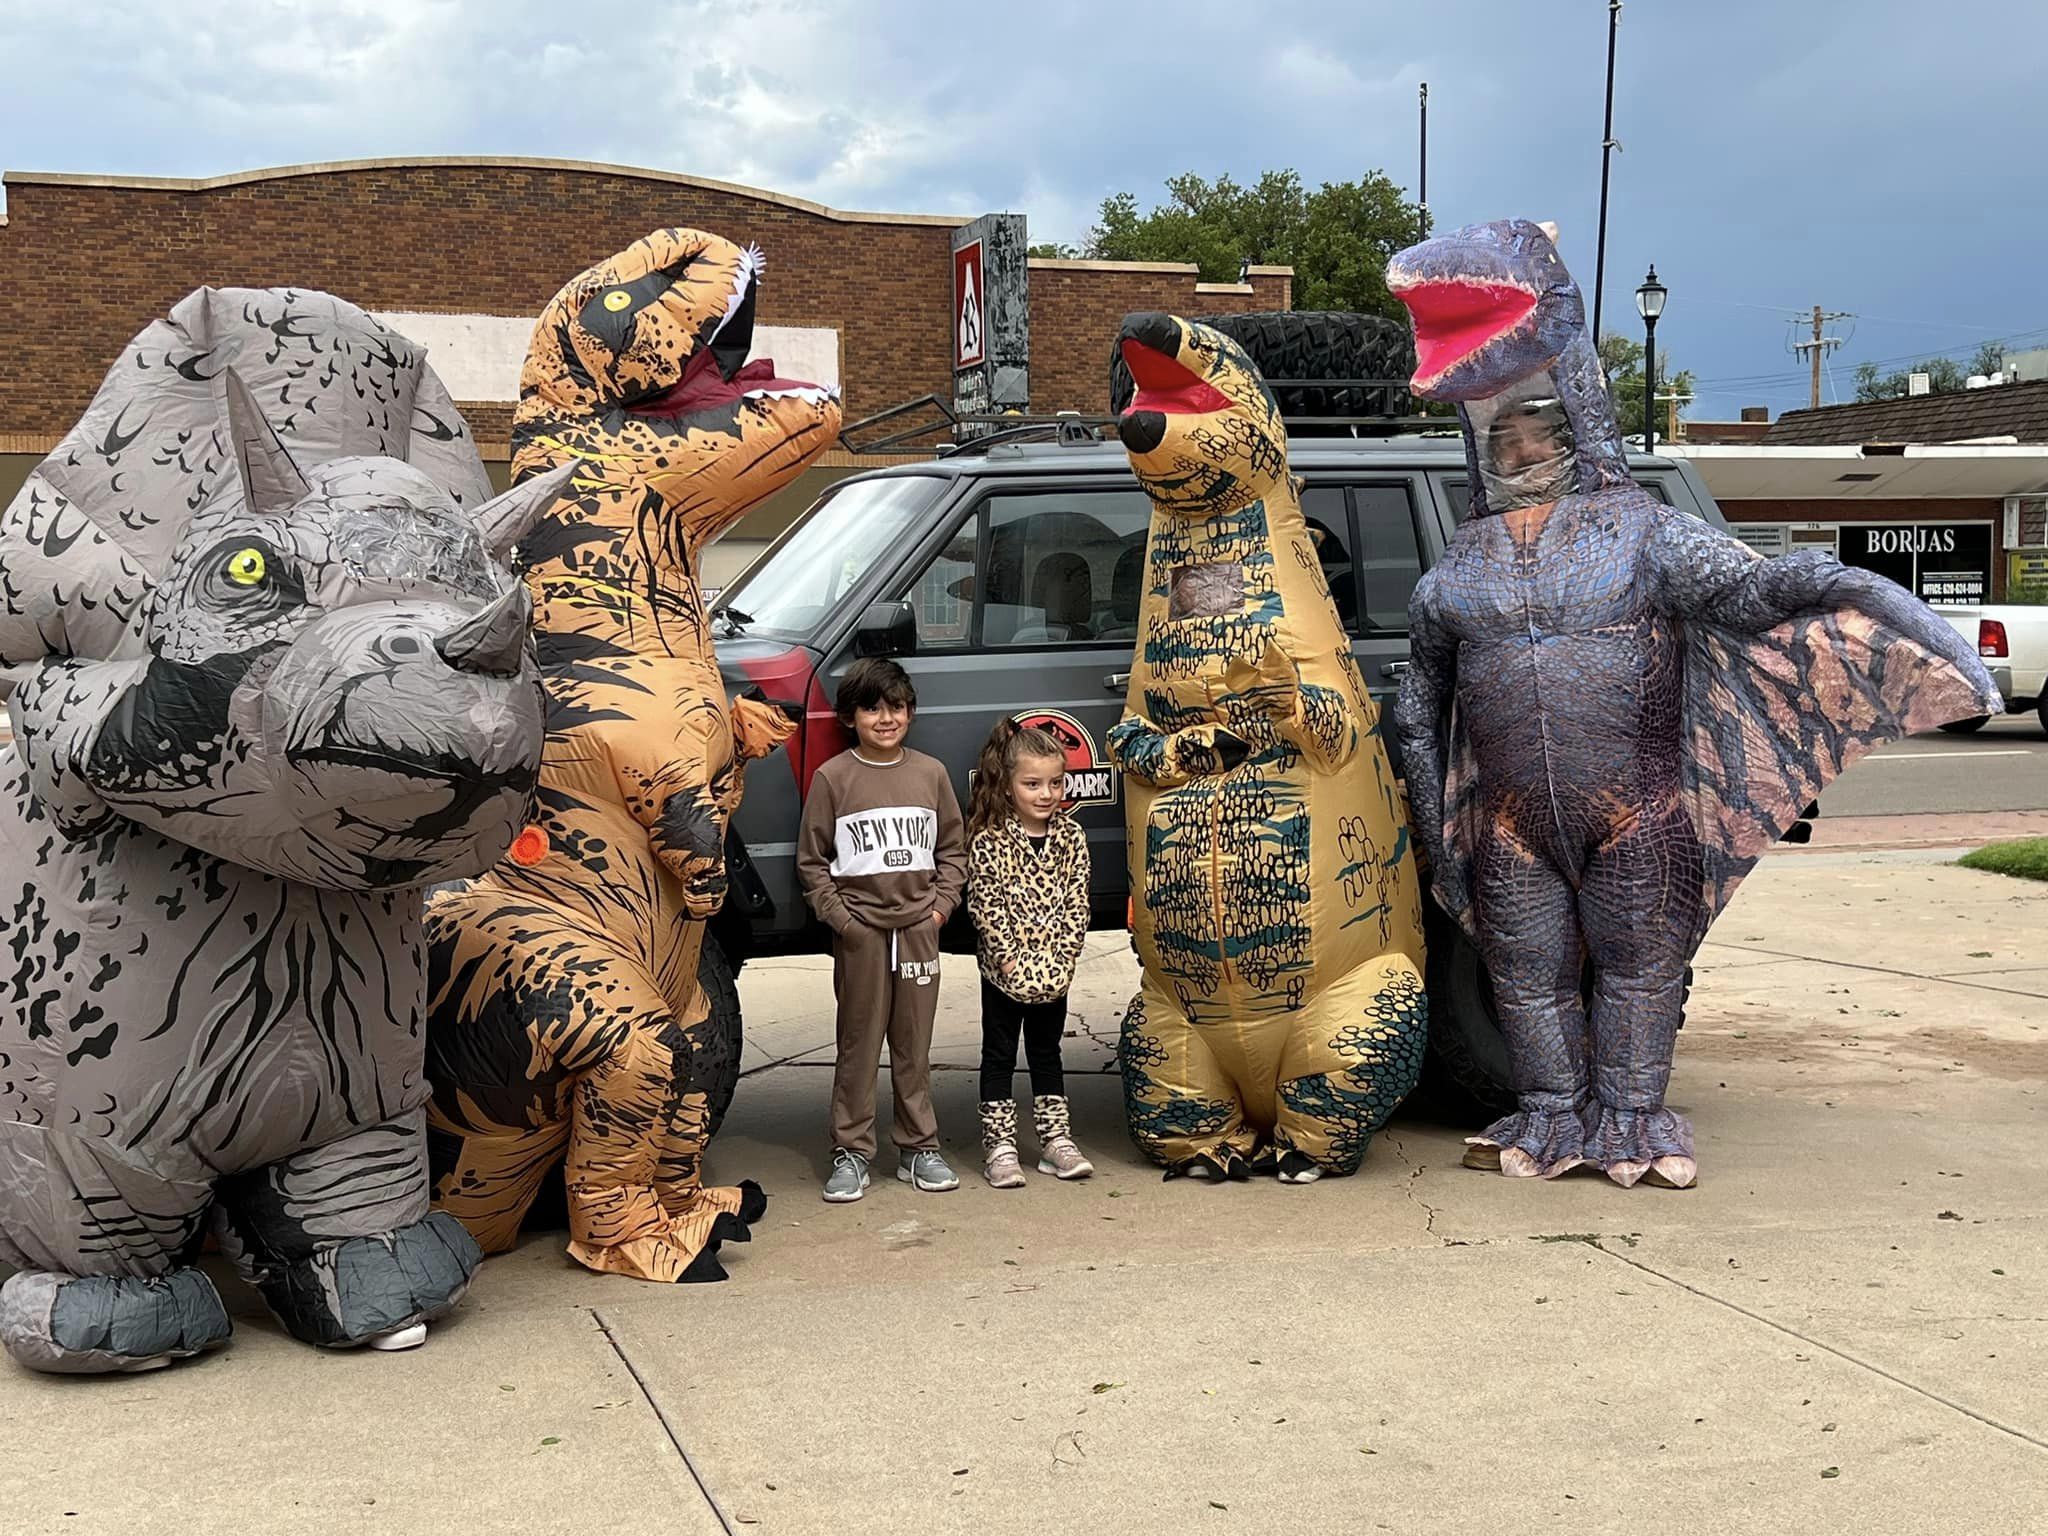 We had a ROARING good time at our Jurassic Park Storytime on July 6th 2023